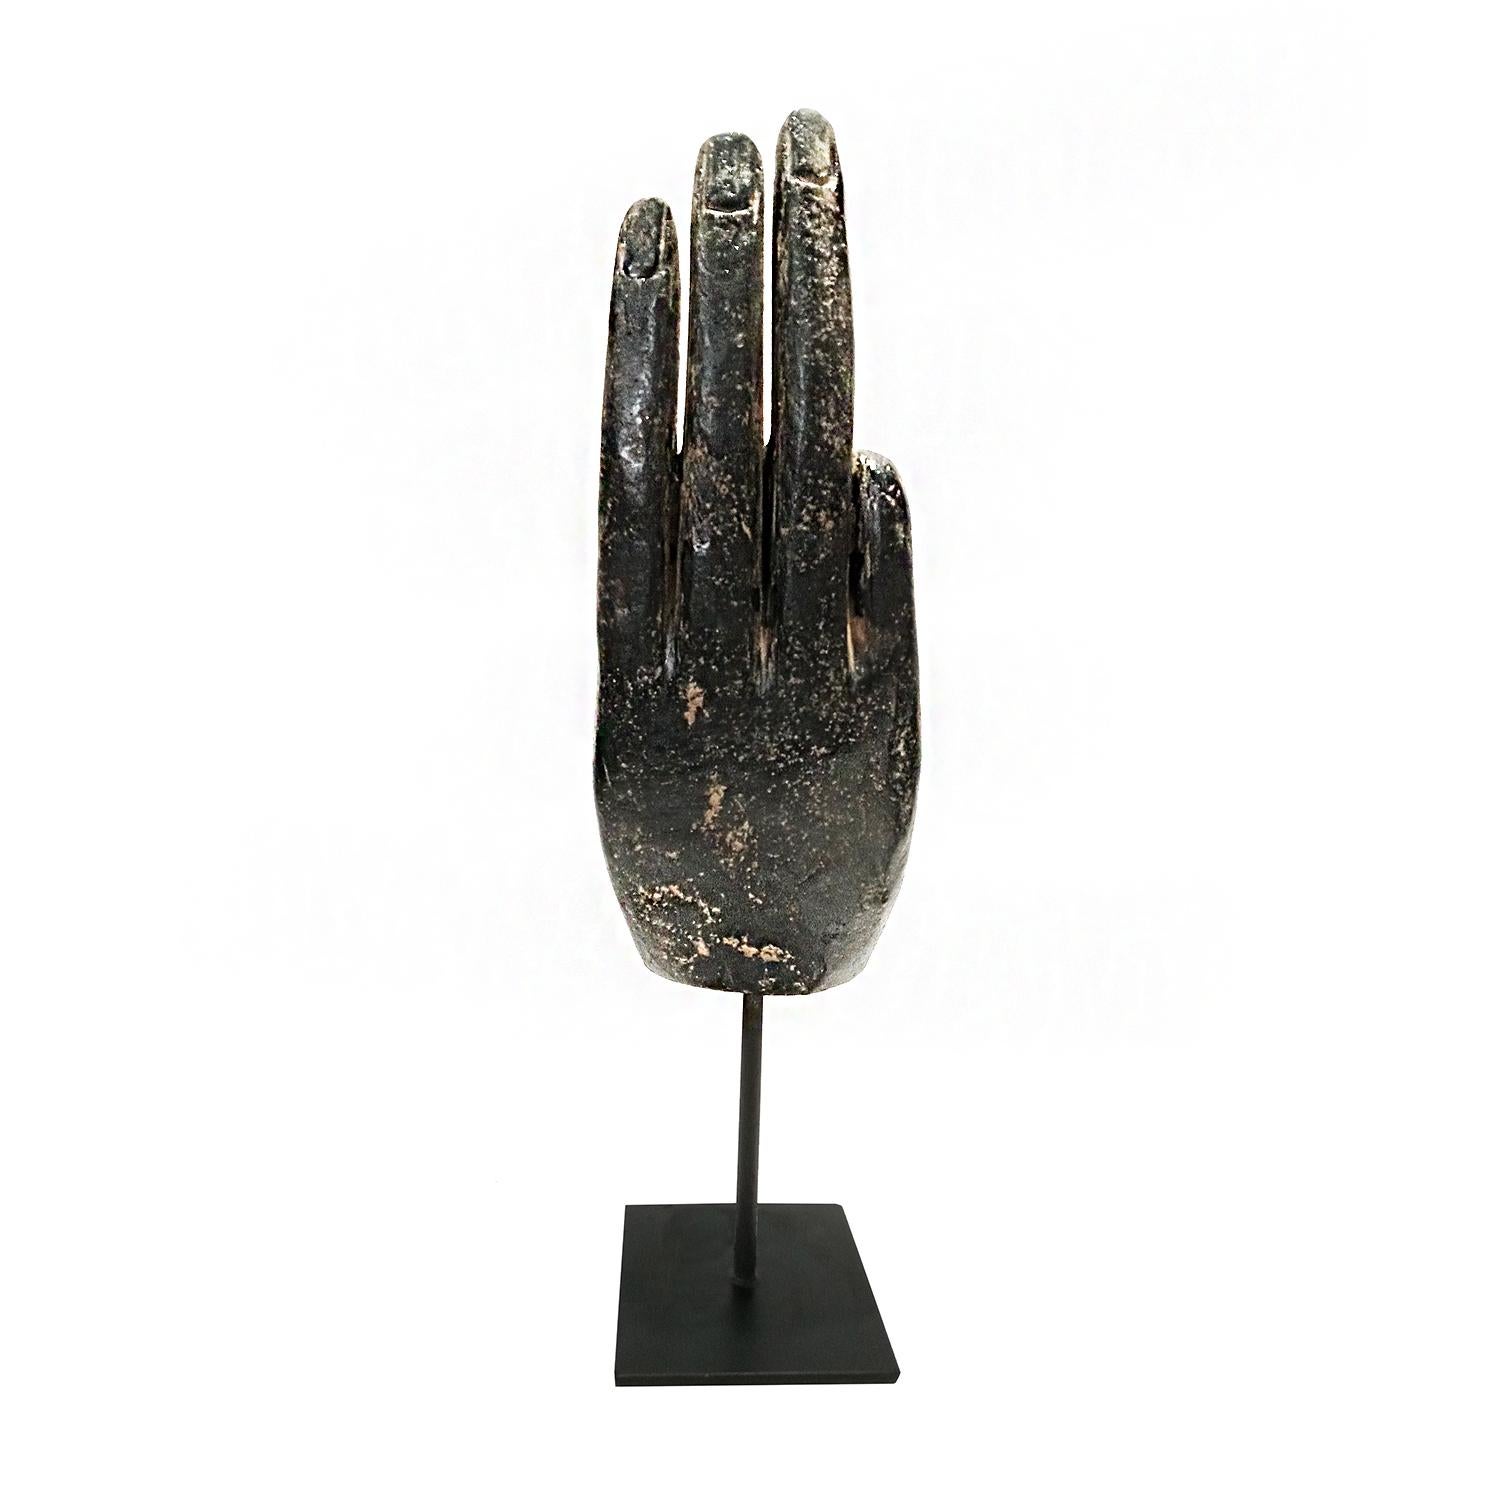 Three Volcanic Rock Hand Sculptures, Mid 20th Century For Sale 8